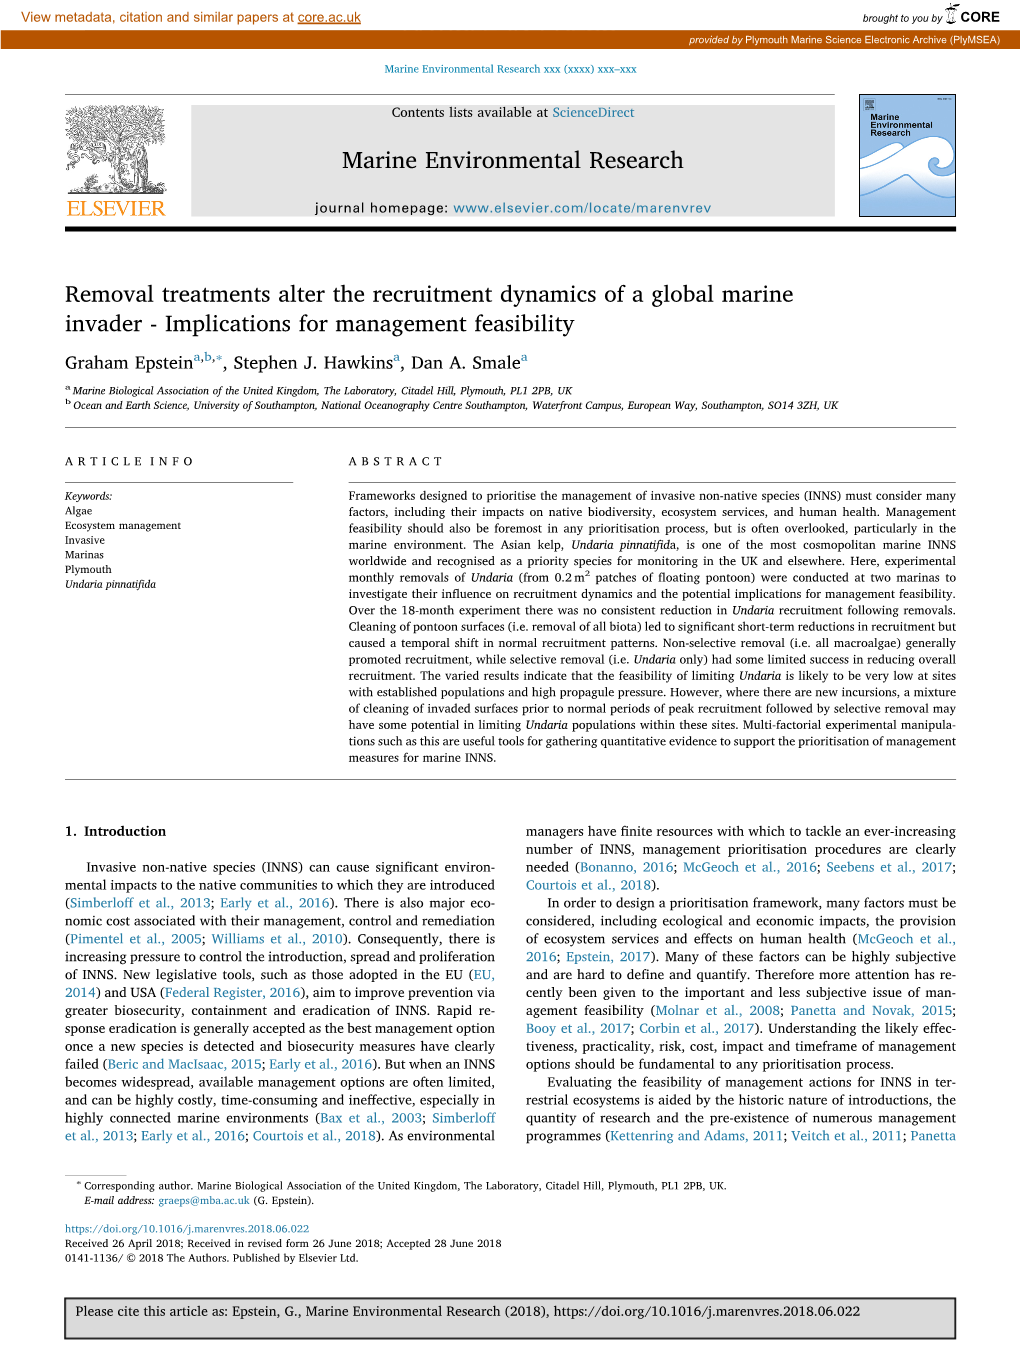 Removal Treatments Alter the Recruitment Dynamics of a Global Marine Invader - Implications for Management Feasibility